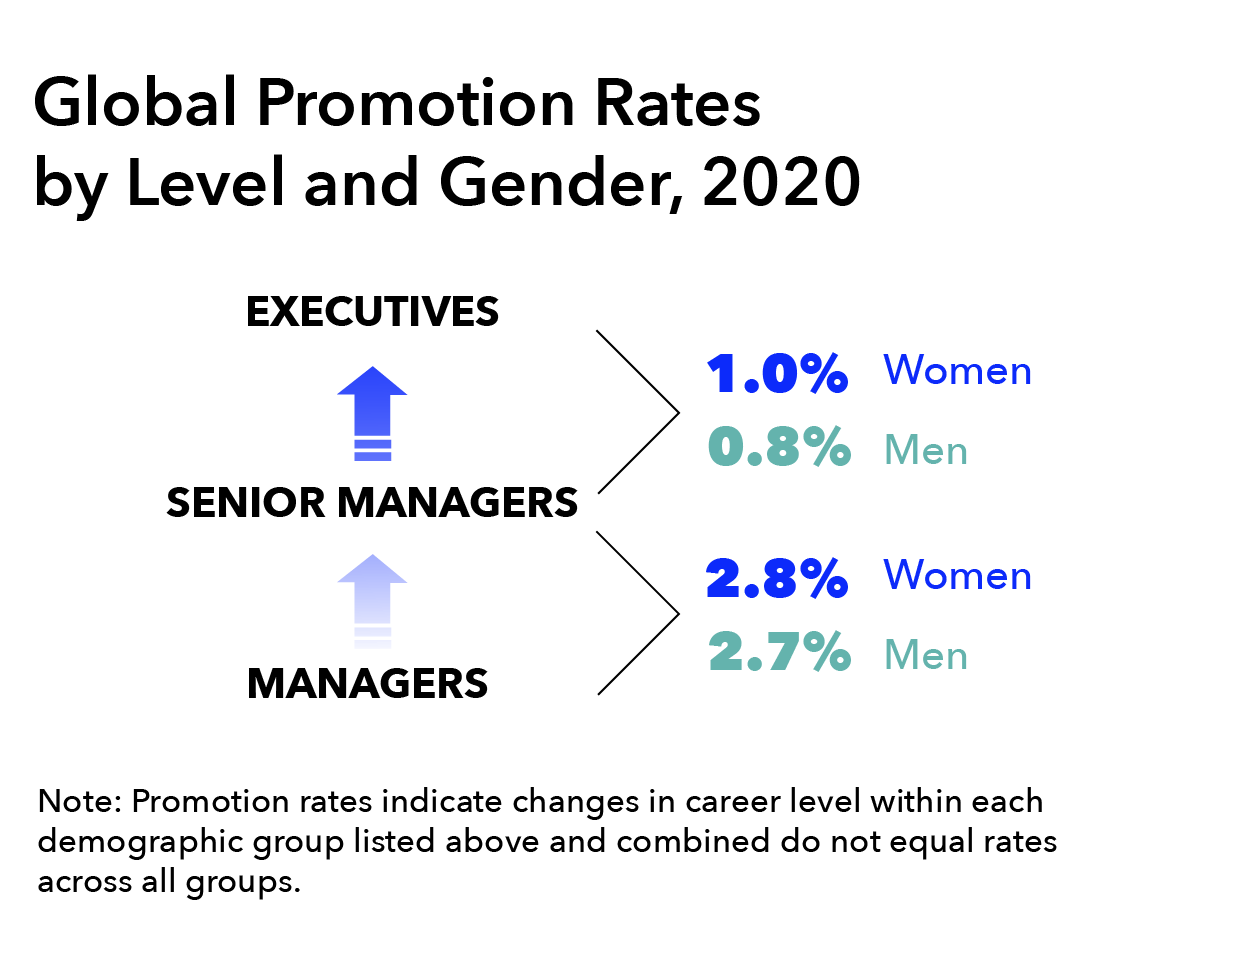 Global Promotion Rates by Level and Gender, 2020 Promotion from Senior Managers to Executive Levels: Women 1.0% Men 0.8% Promotion from Manager to Senior Manager Levels: Women 2.8% Men 2.7% Note: Promotion rates indicate changes in career level within each demographic group listed above and combined do not equal rates across all groups.